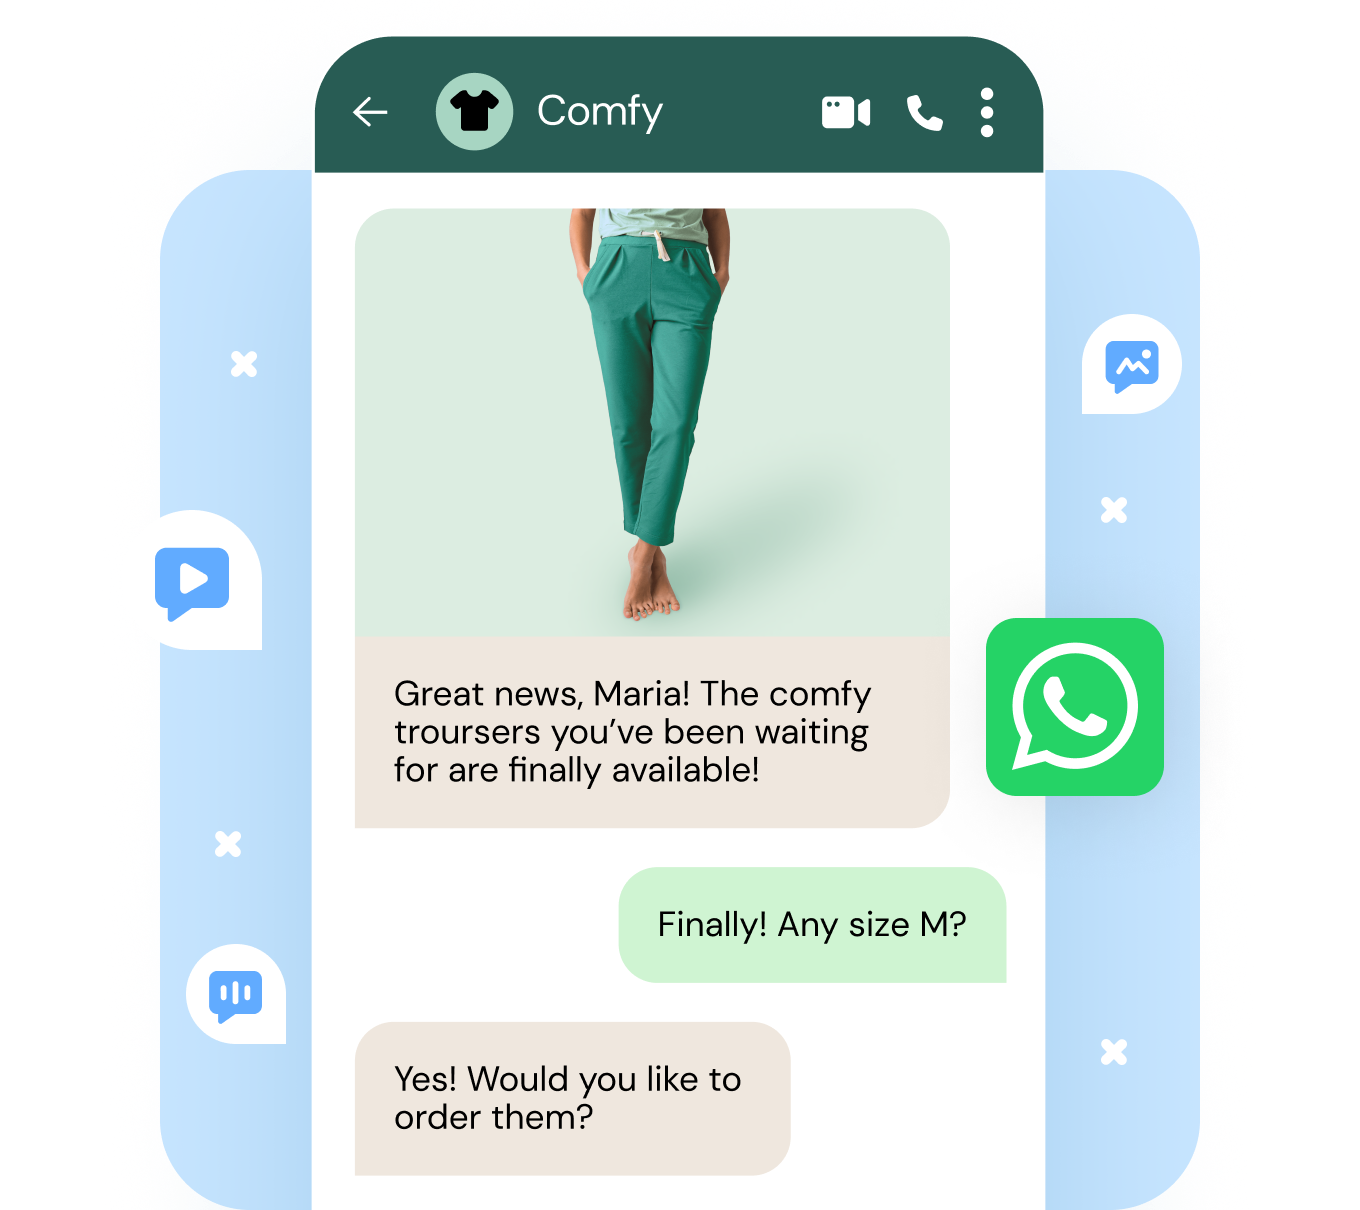 Image for Attract, engage and retain customers with rich WhatsApp experiences